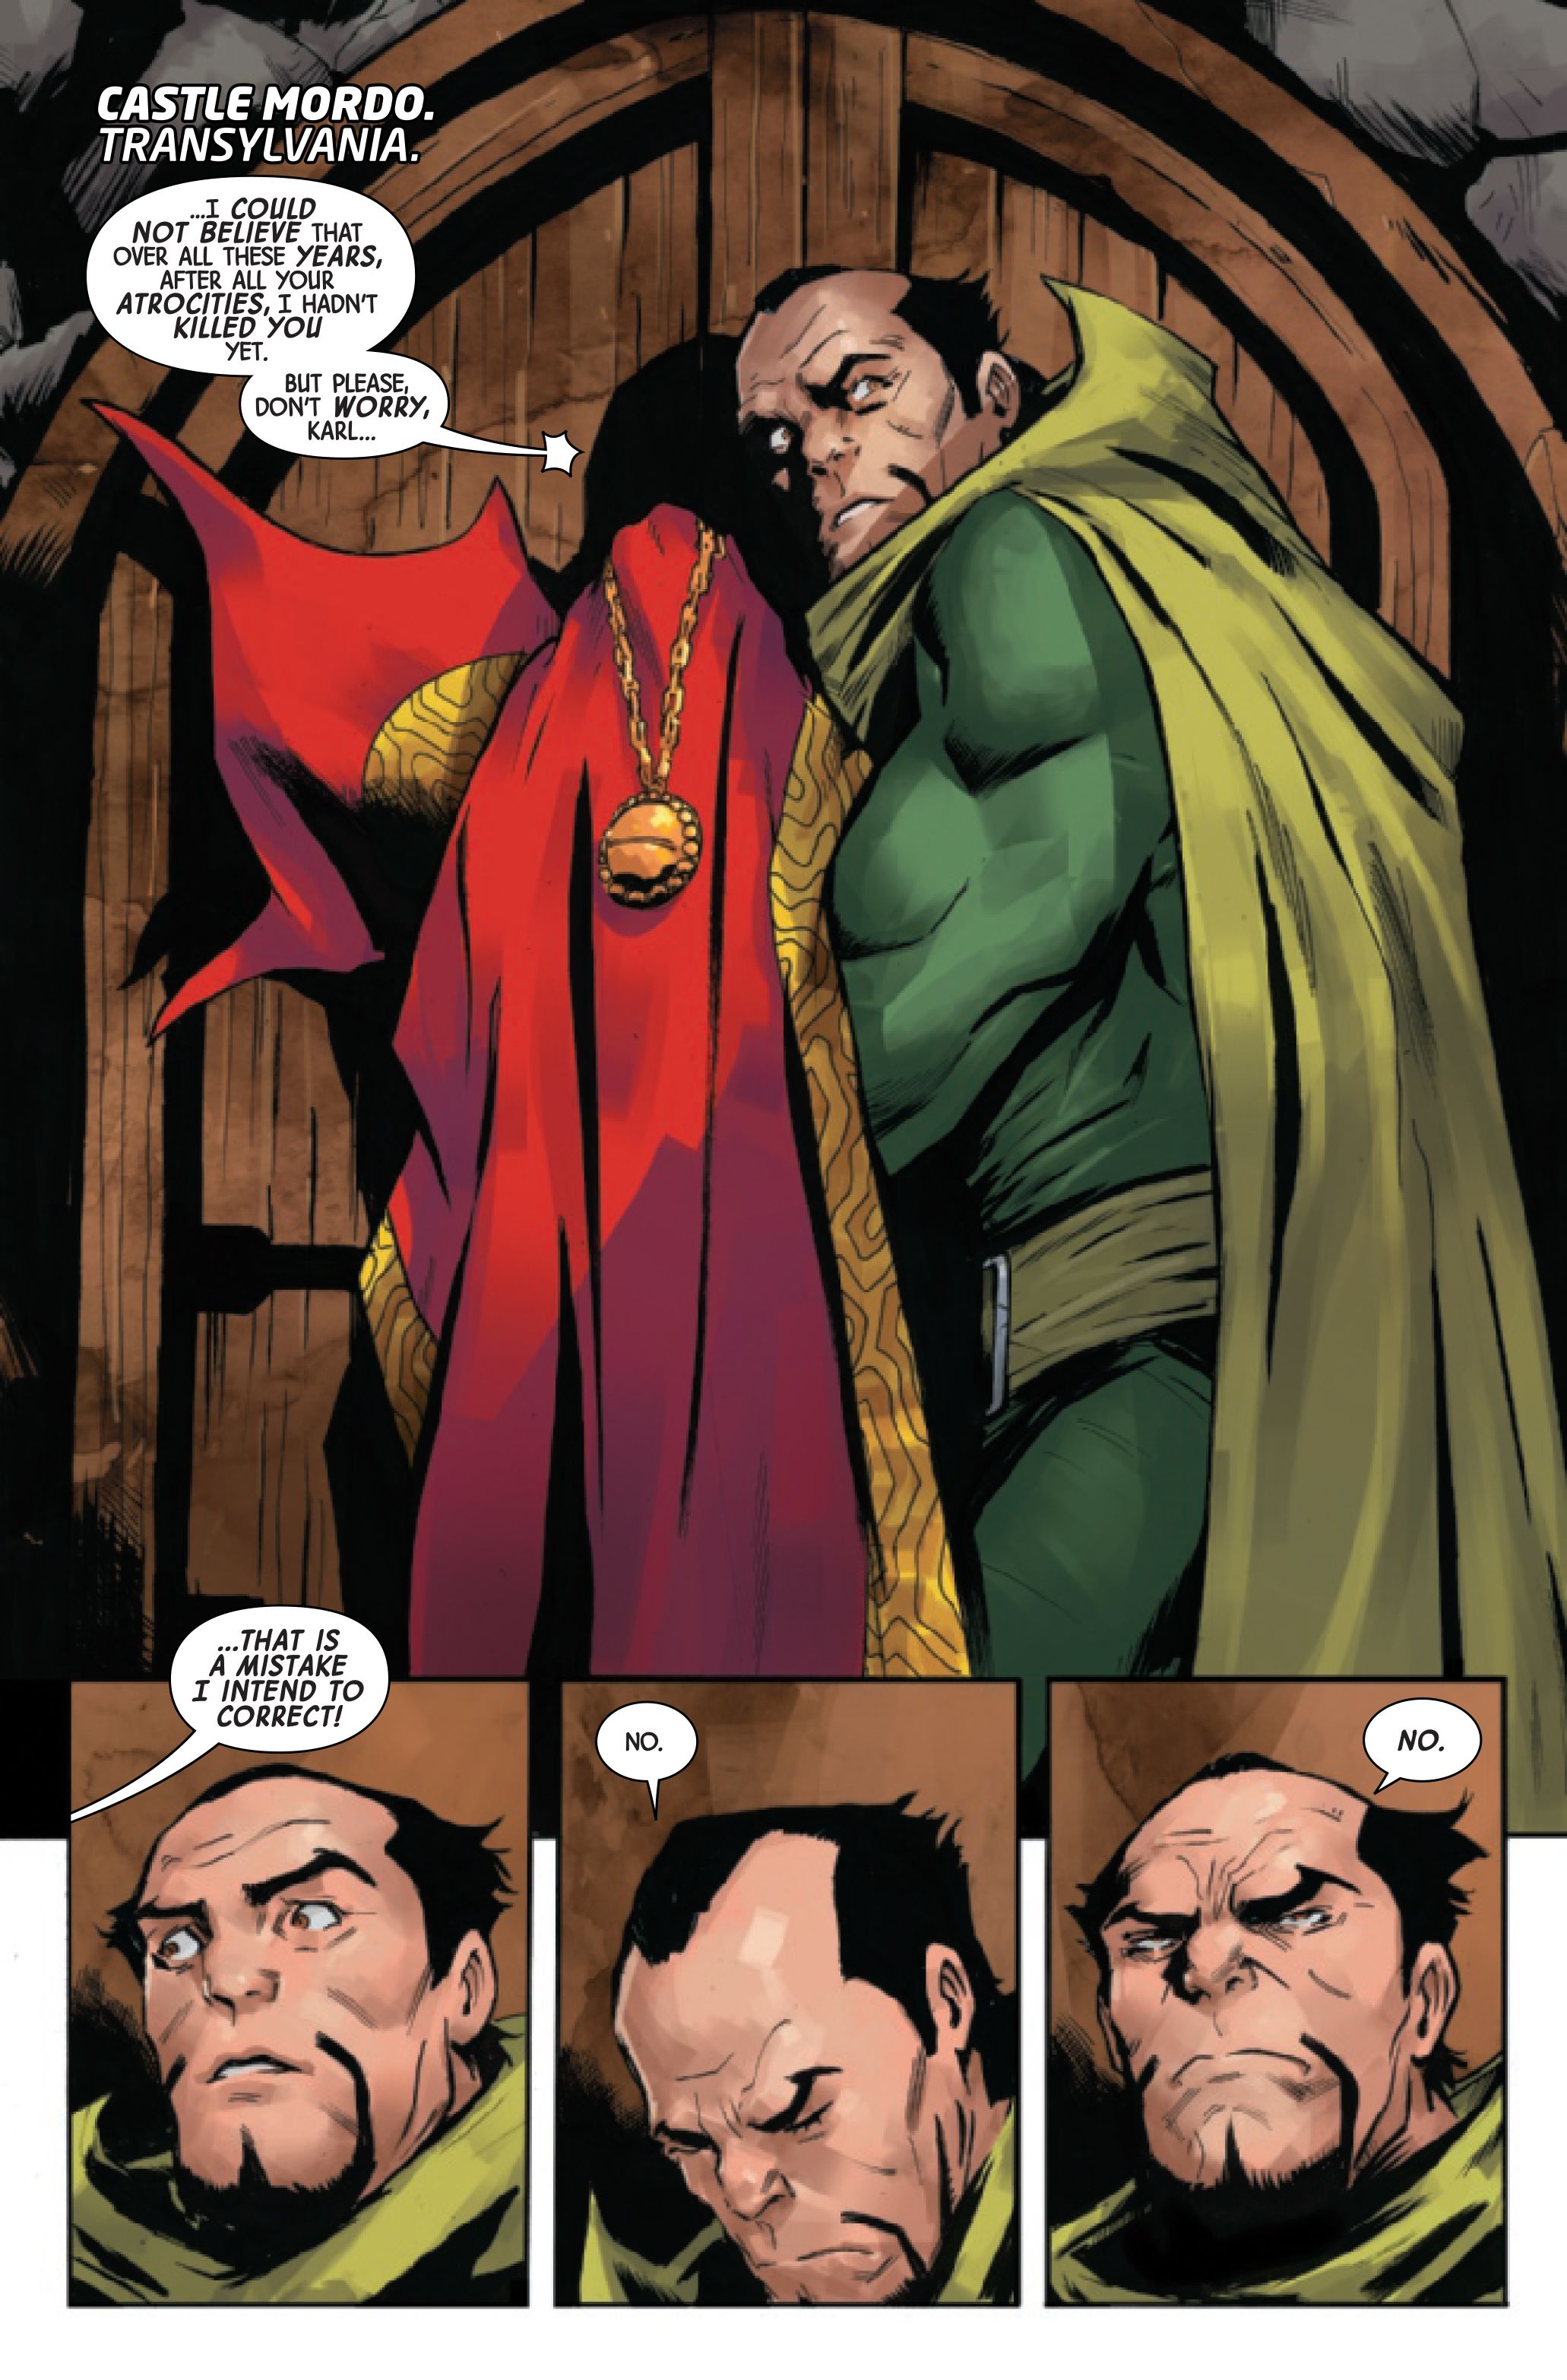 Page 1 for the Death of Doctor Strange #4, by Jed MacKay, Lee Garbett, Antonio Fabela and VC's Cory Petit.